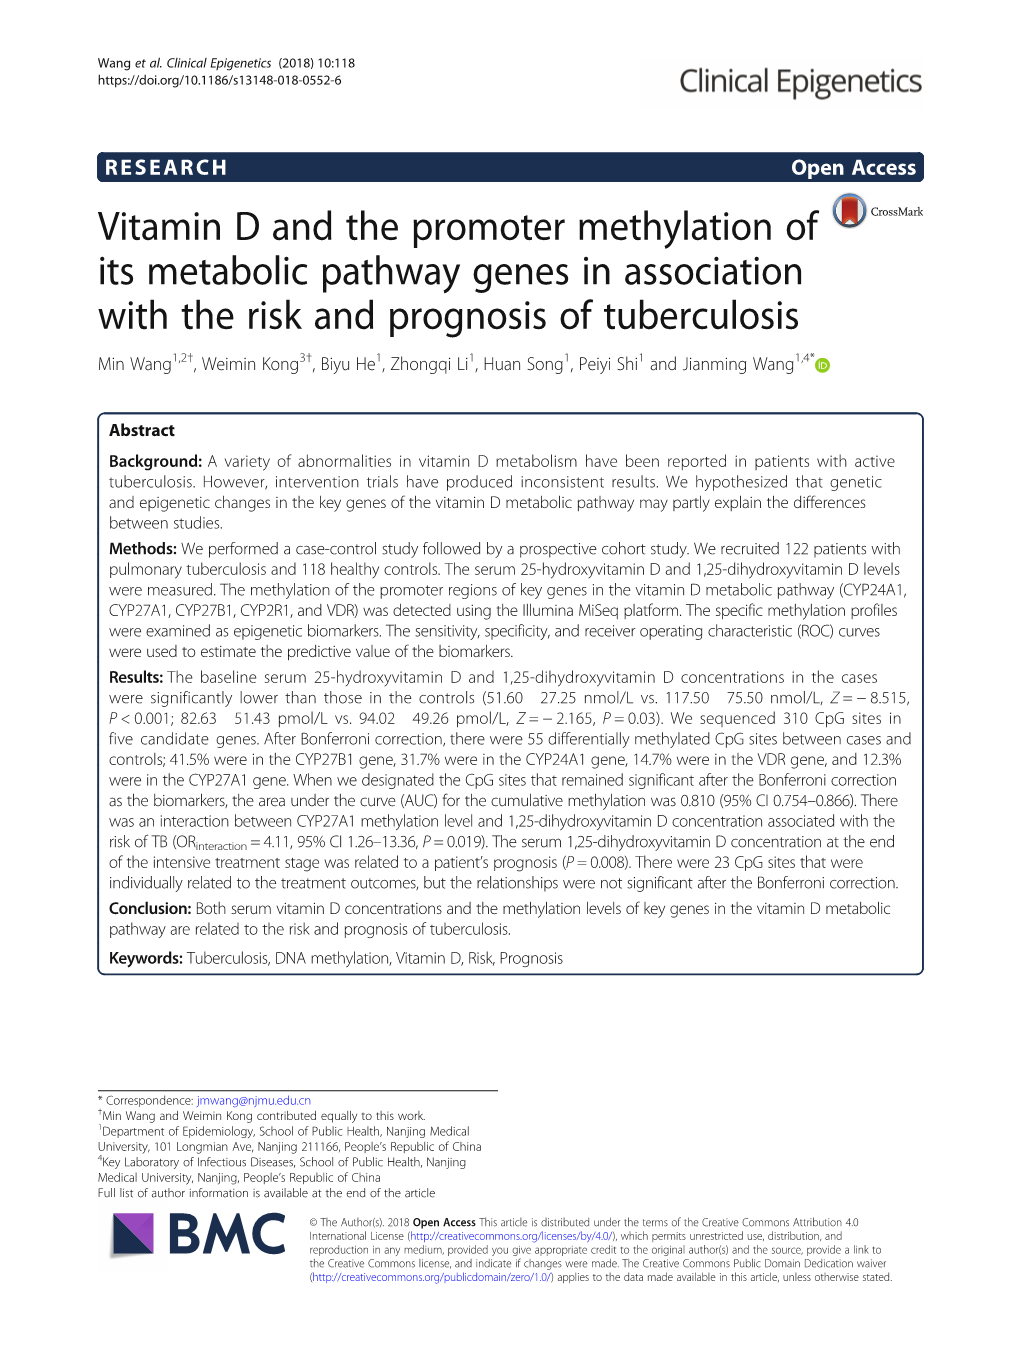 Vitamin D and the Promoter Methylation of Its Metabolic